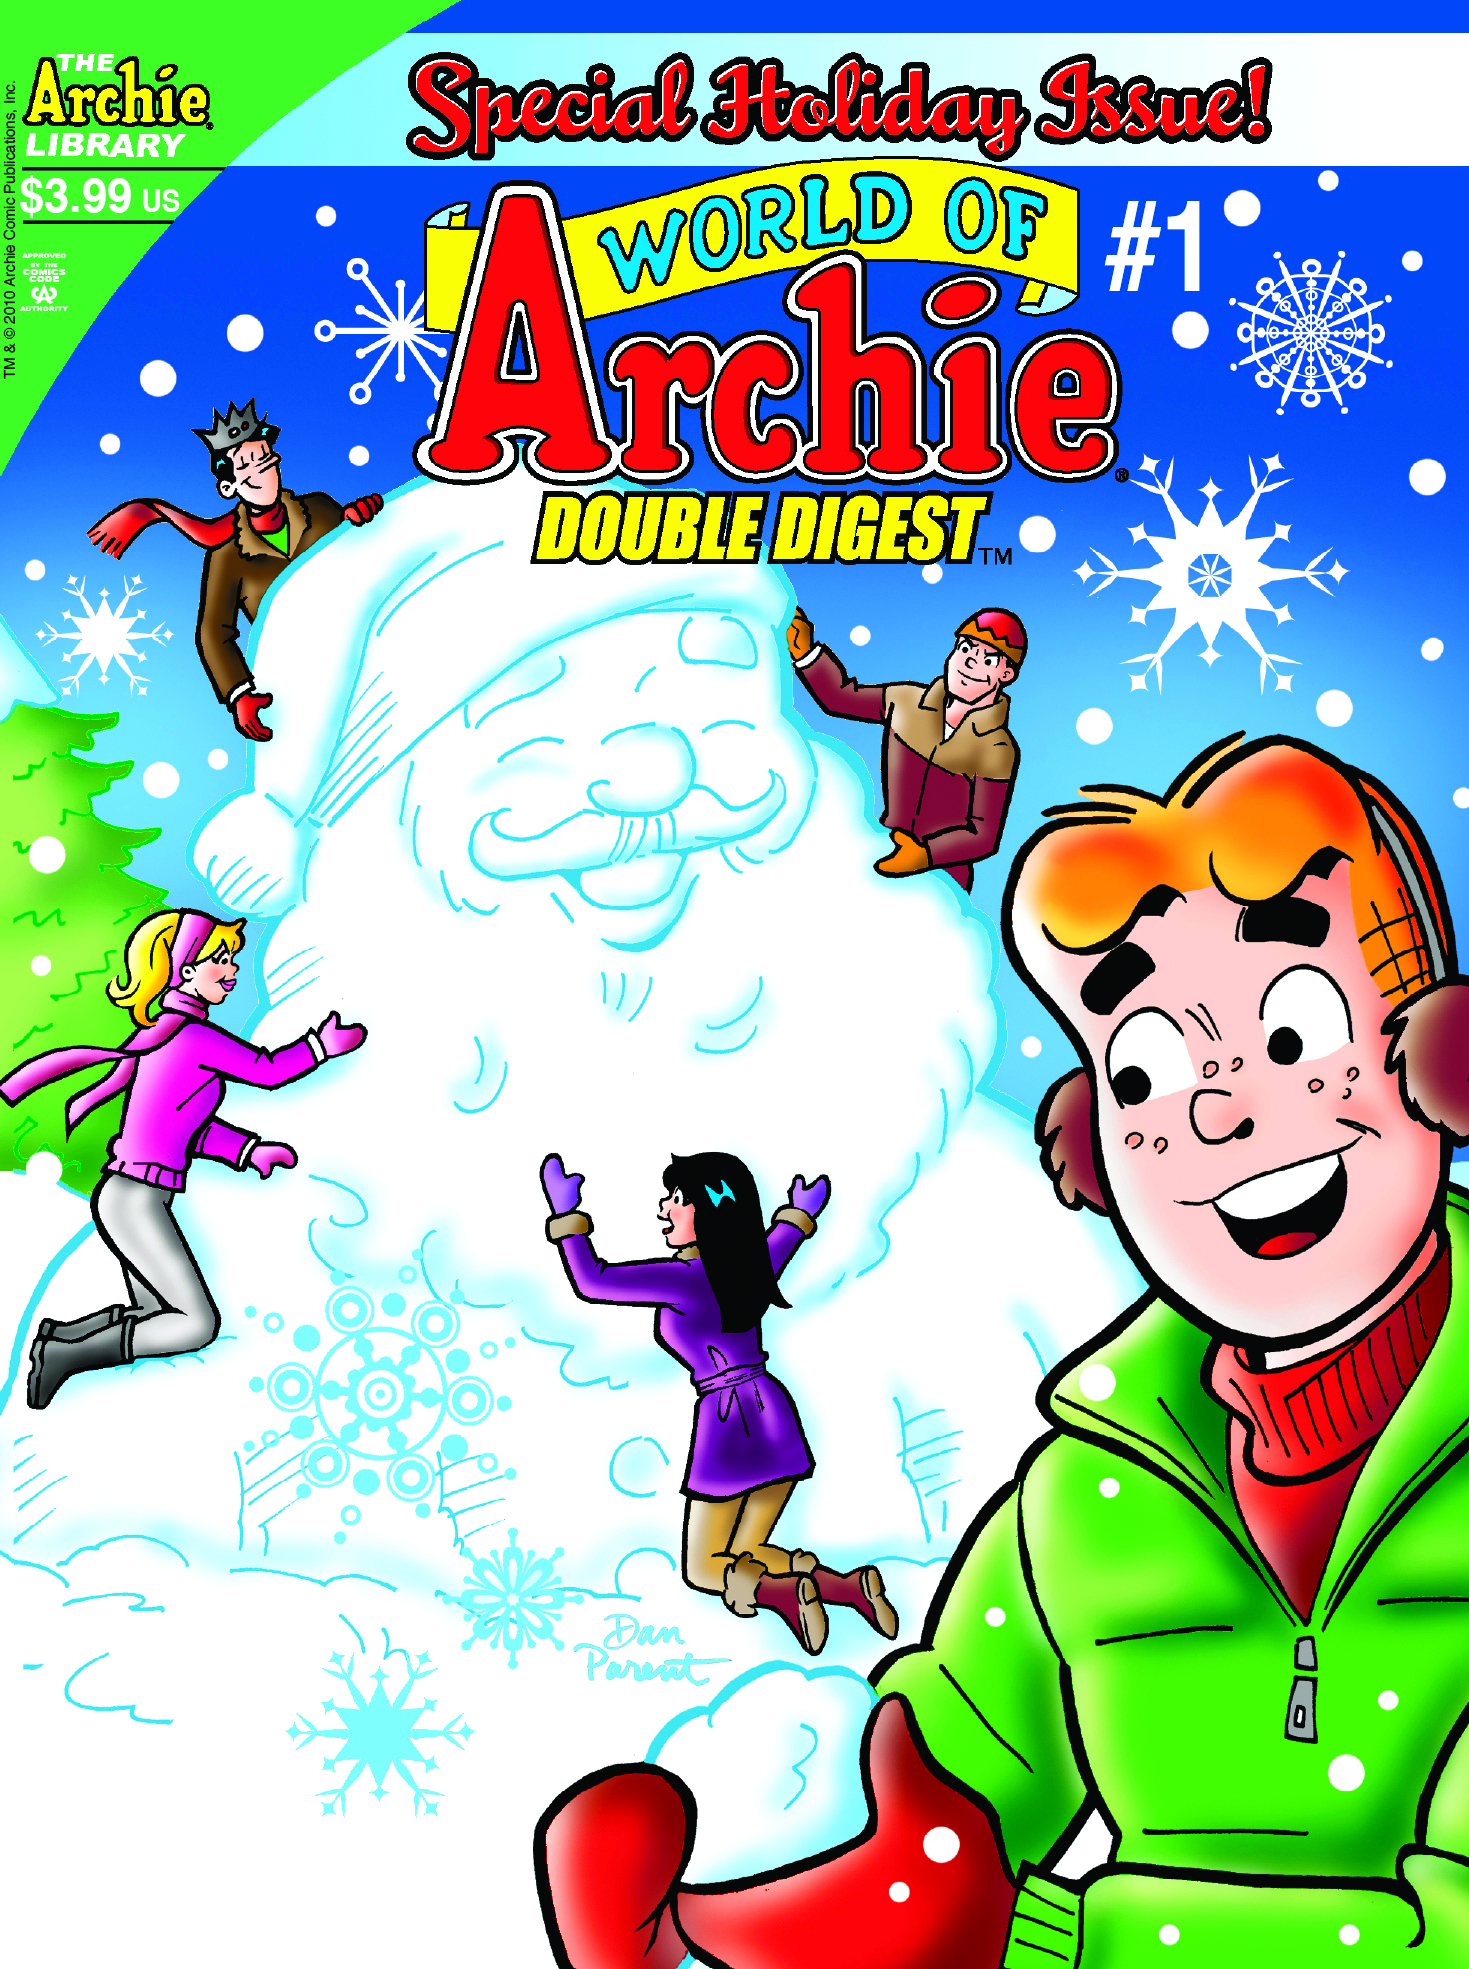 WORLD OF ARCHIE DOUBLE DIGEST #1